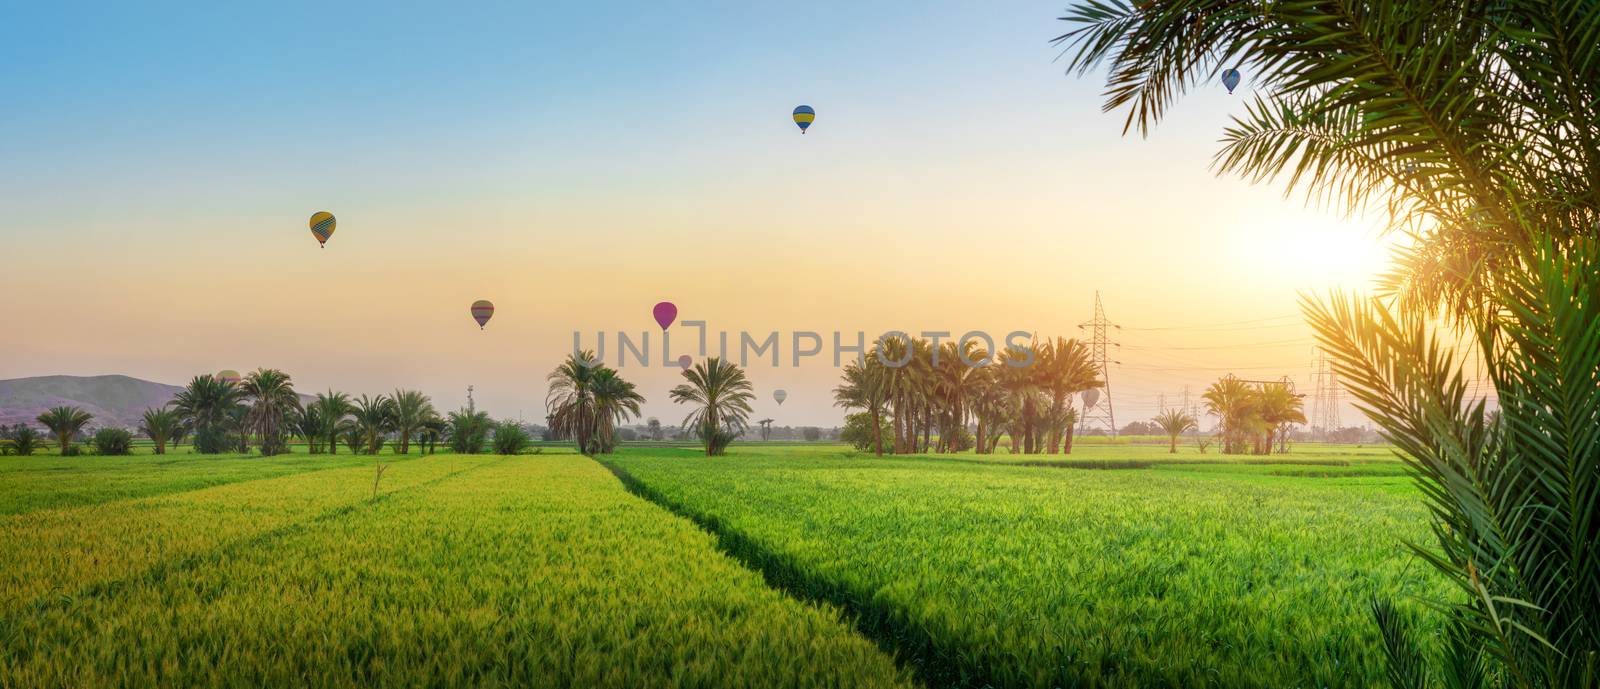 Luxor, Egypt hot air balloons rising at sunrise over a green oasis in the desert